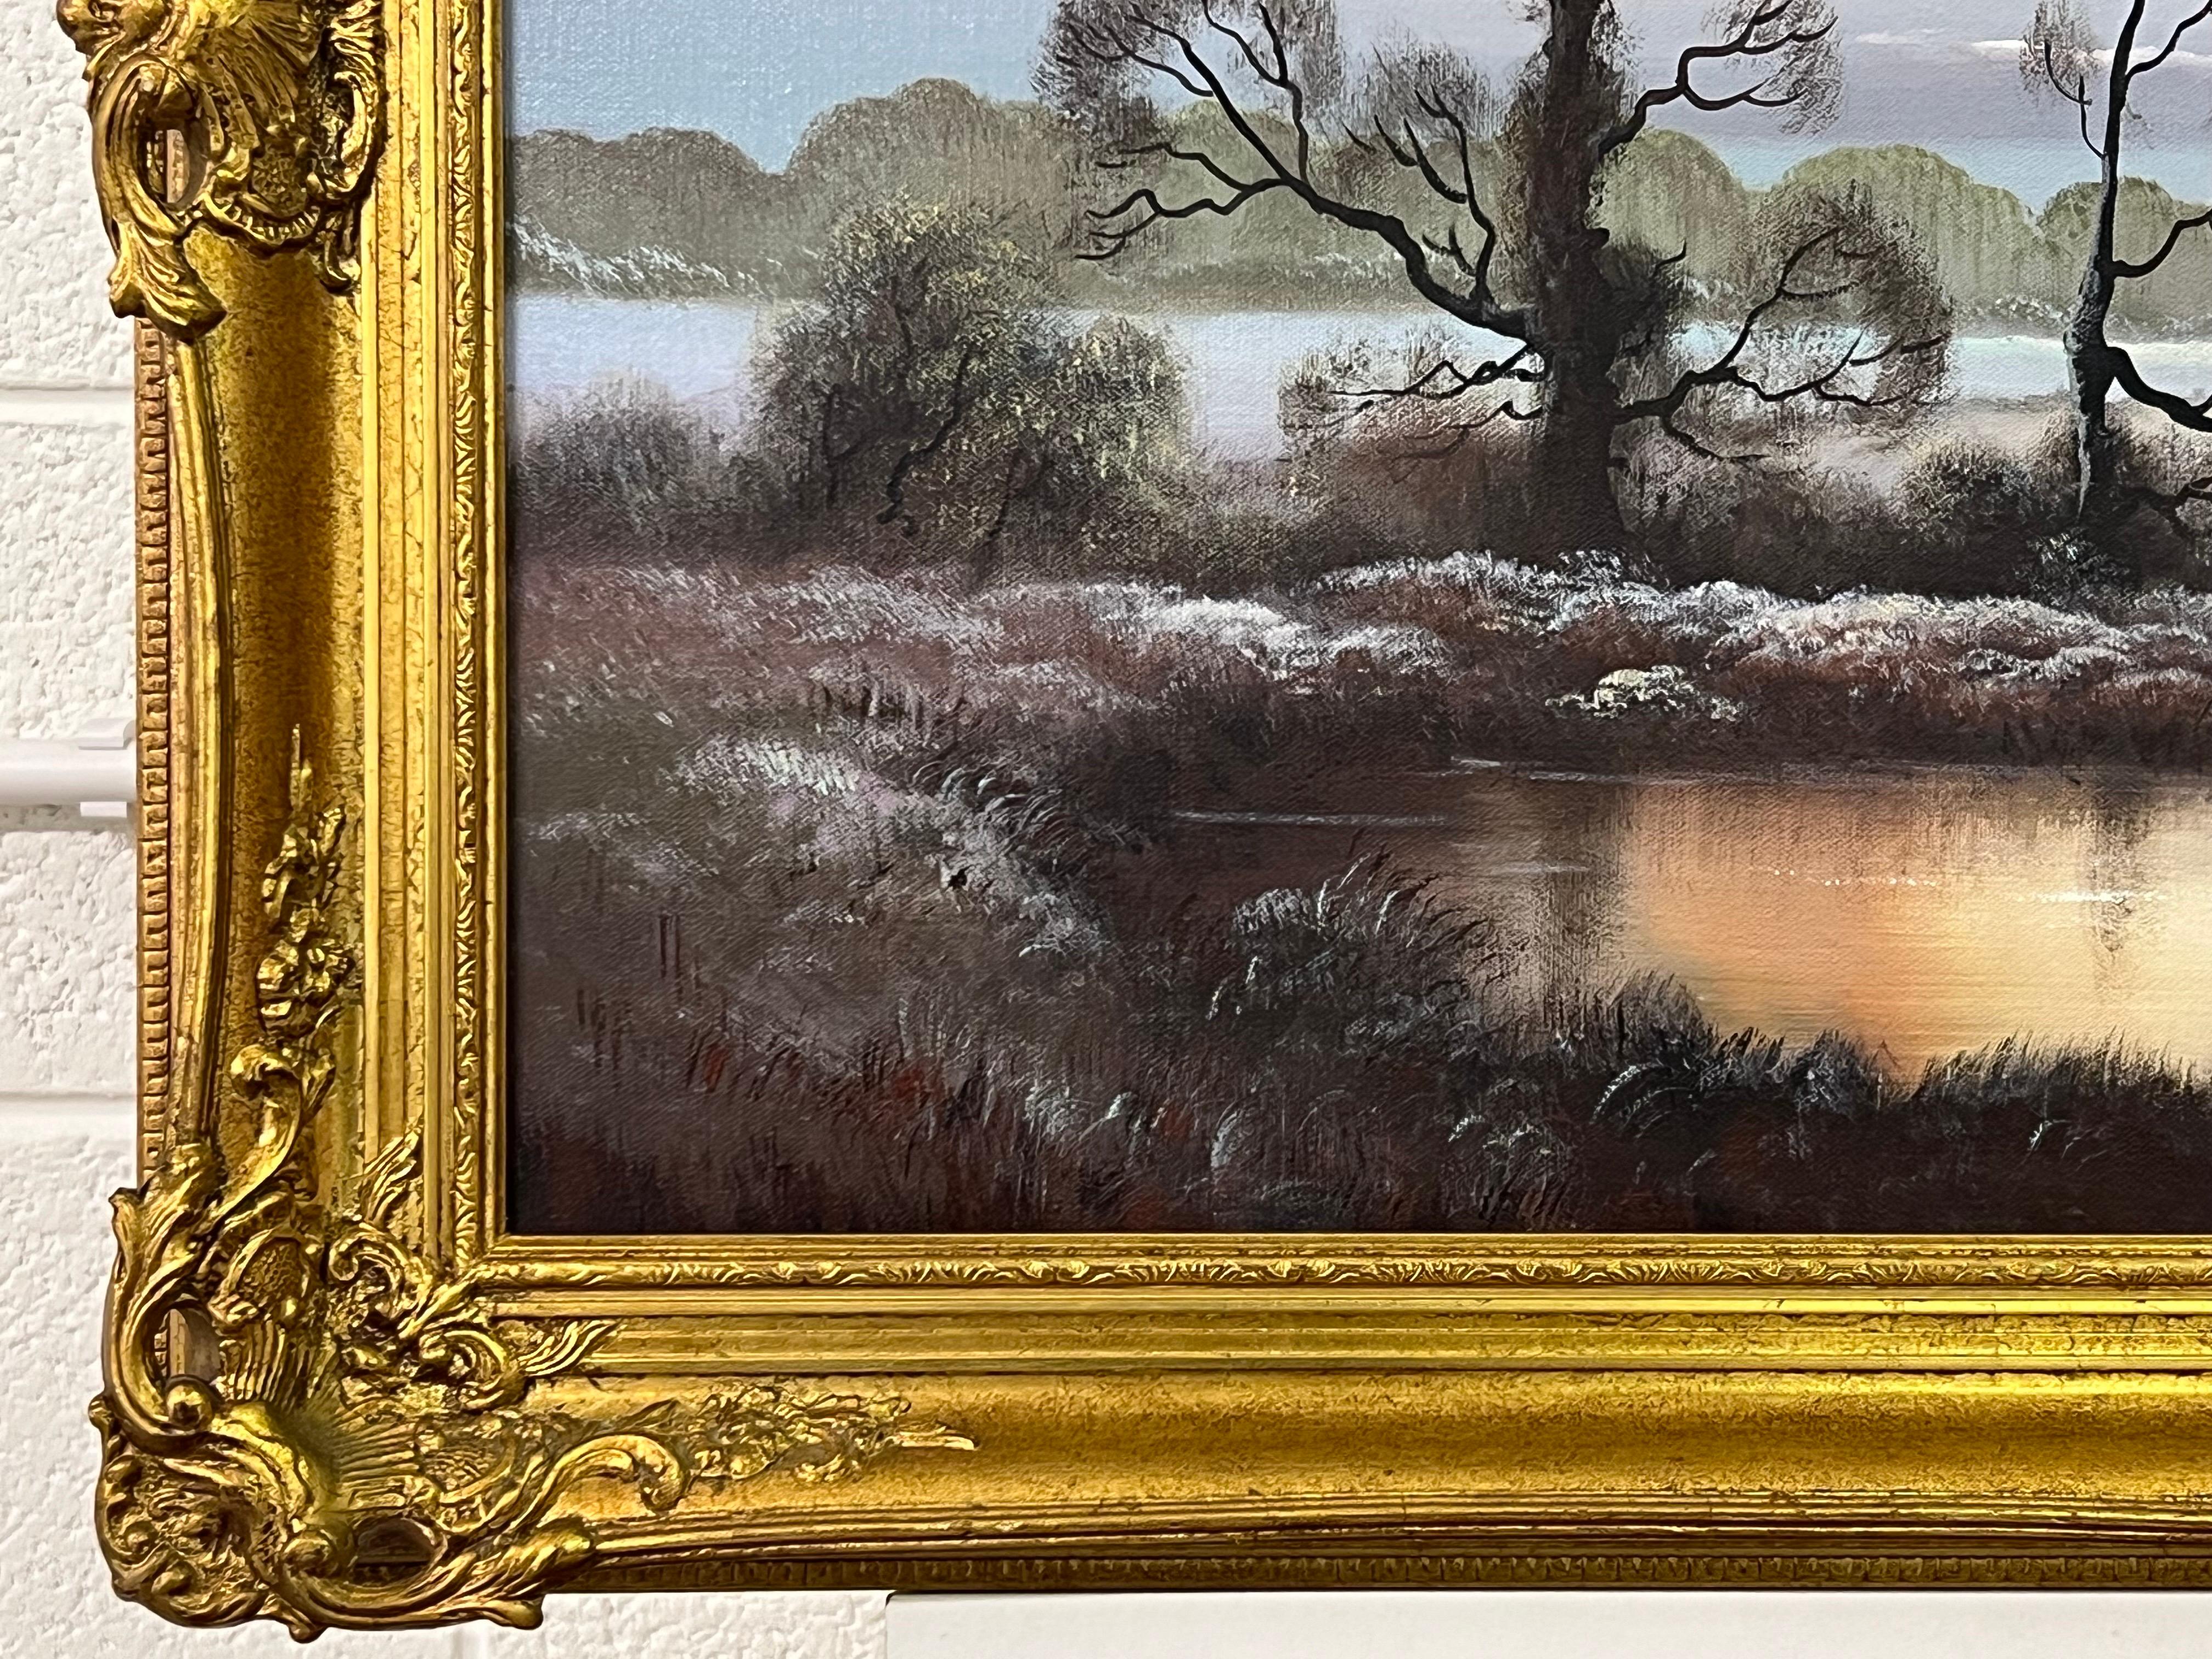 Winter Mist at a Farm in the English Countryside by 20th Century British Artist, Wendy Reeves

Art measures 40 x 20 inches
Frame measures 46 x 26 inches (framed in a high quality ornate gold moulding) 

Wendy Reeves garnered acclaim for her Scottish